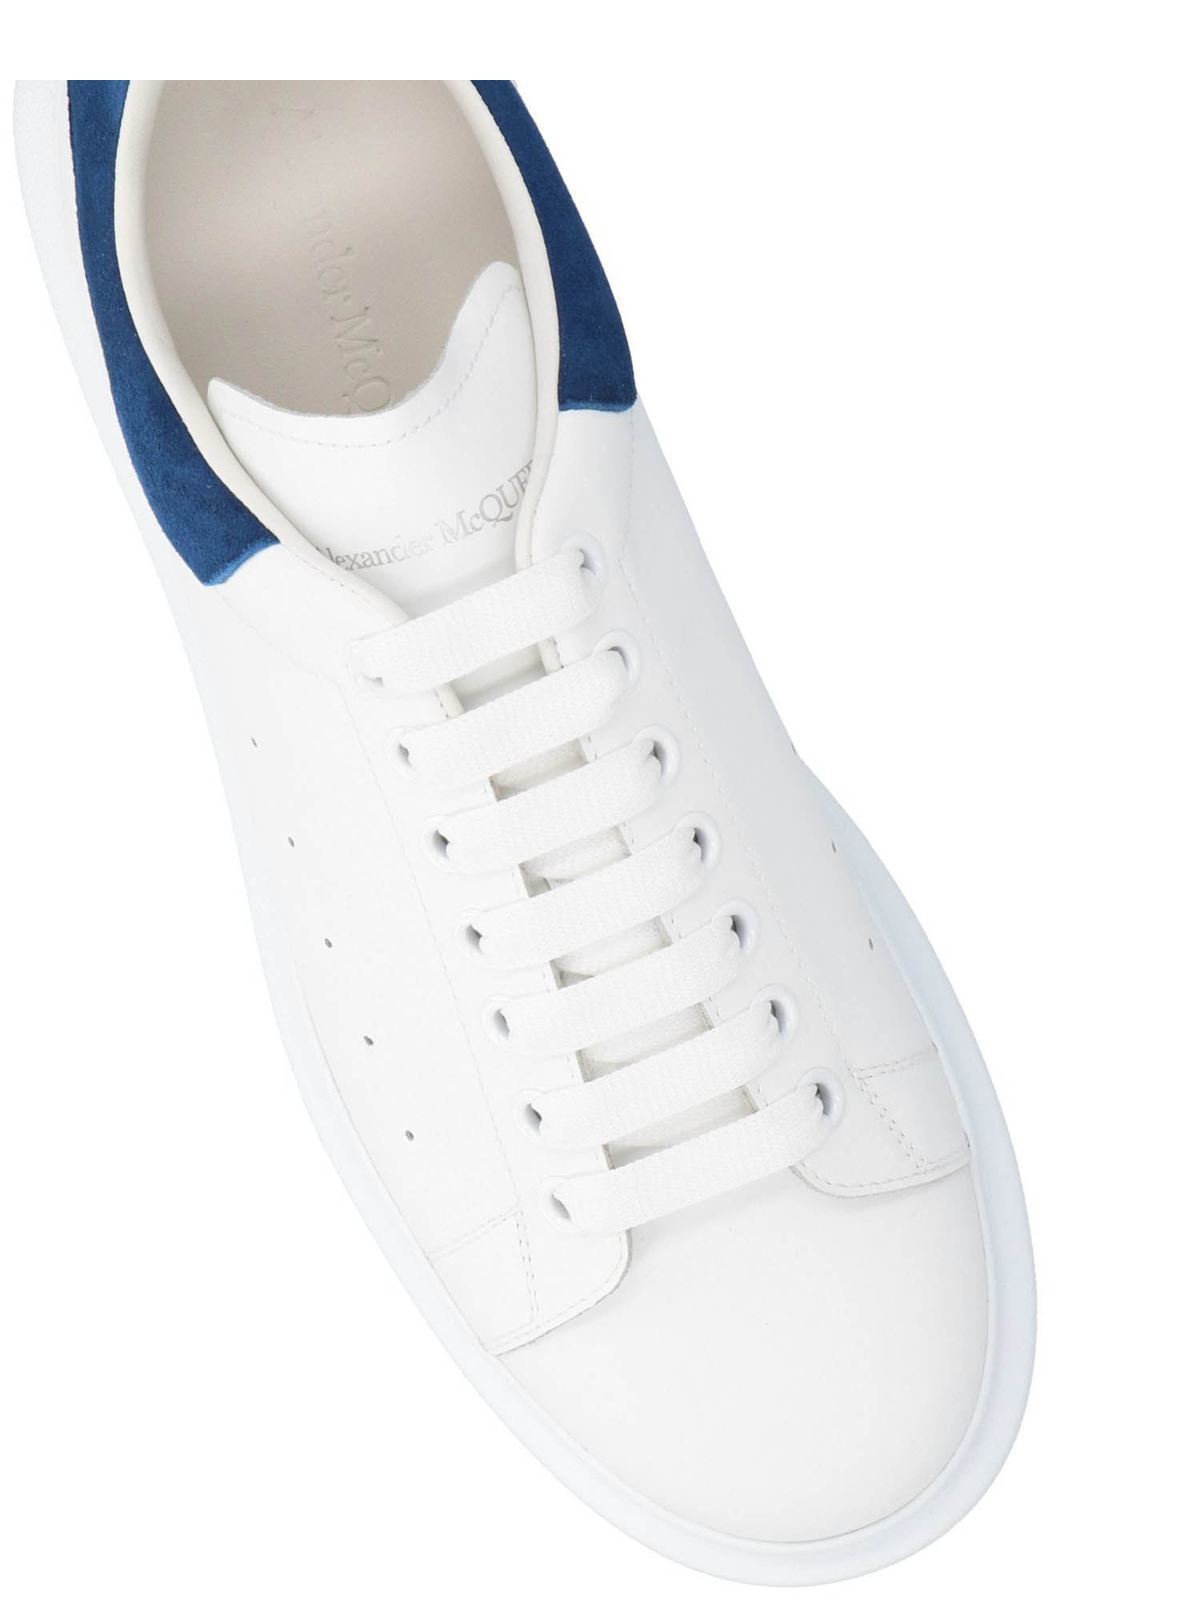 Shop Alexander Mcqueen Oversize Sneakers In White And Blue In Blanco